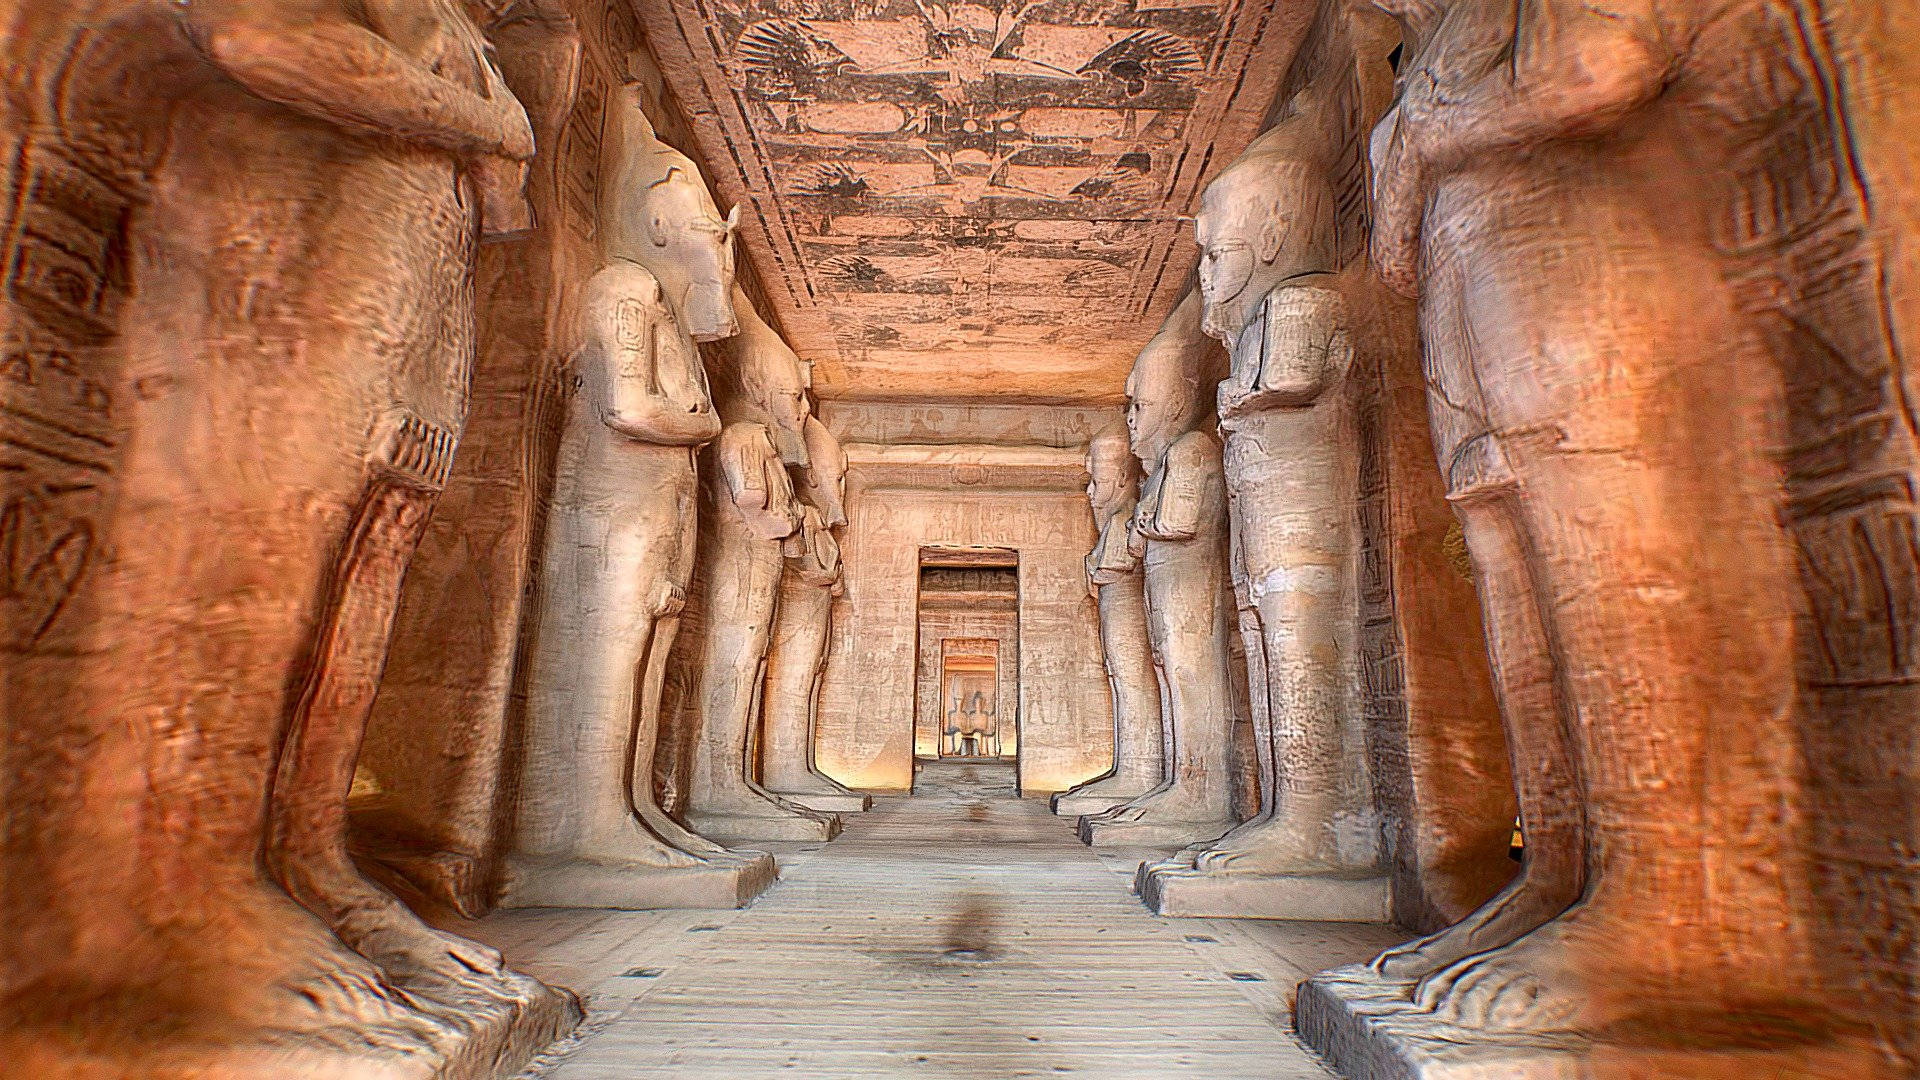 Giant Sandstone Statues Inside The Temple Of Abu Simbel Wallpaper